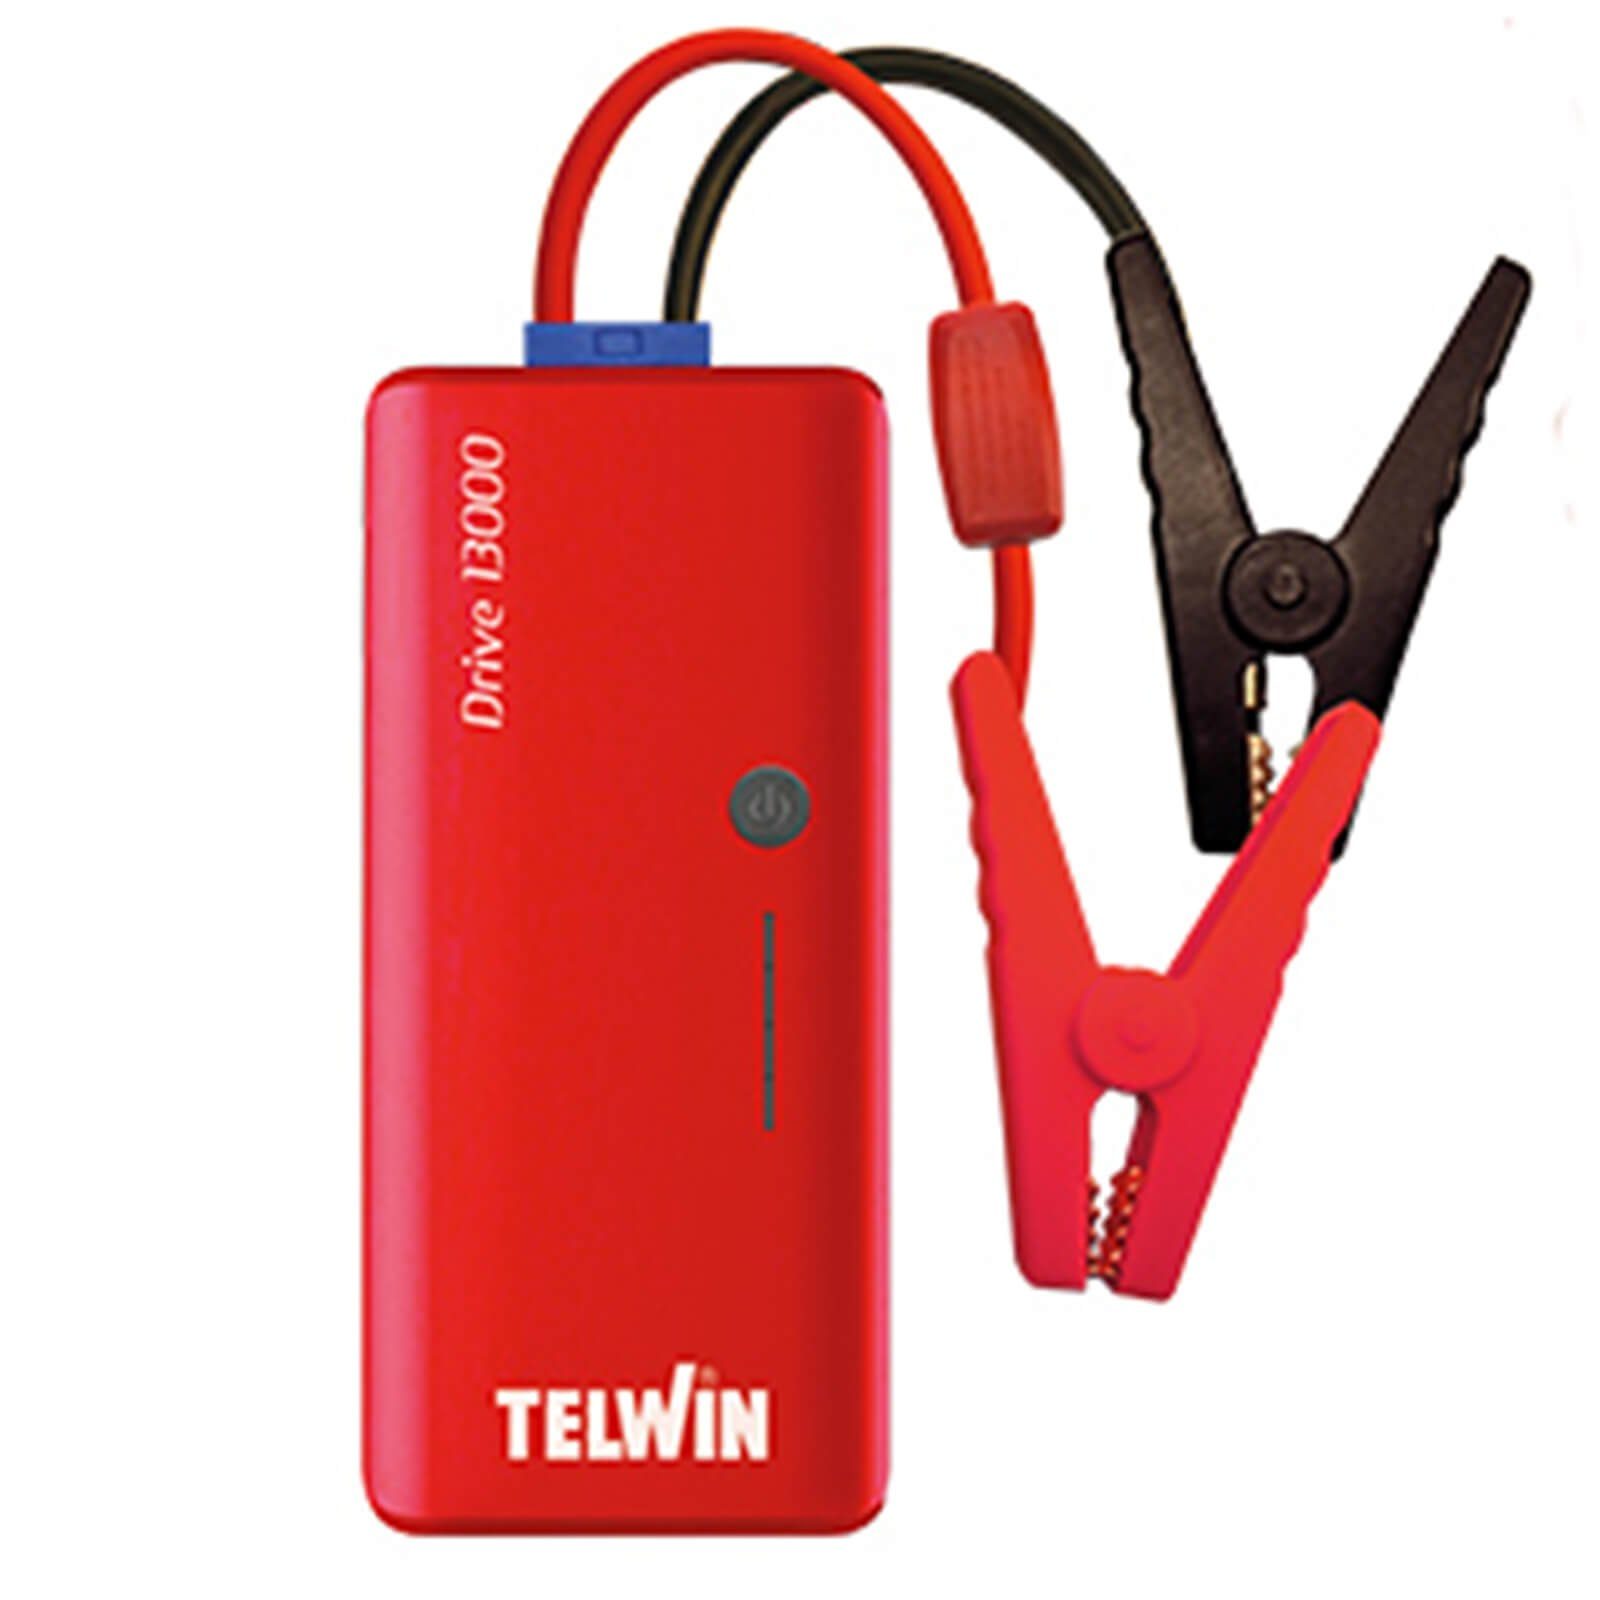 3in1 LED Drive (12 13000 V) Drive Telwin Power Starthilfegerät, Bank, Leuchte TELWIN Starthilfegerät 13000 12V -